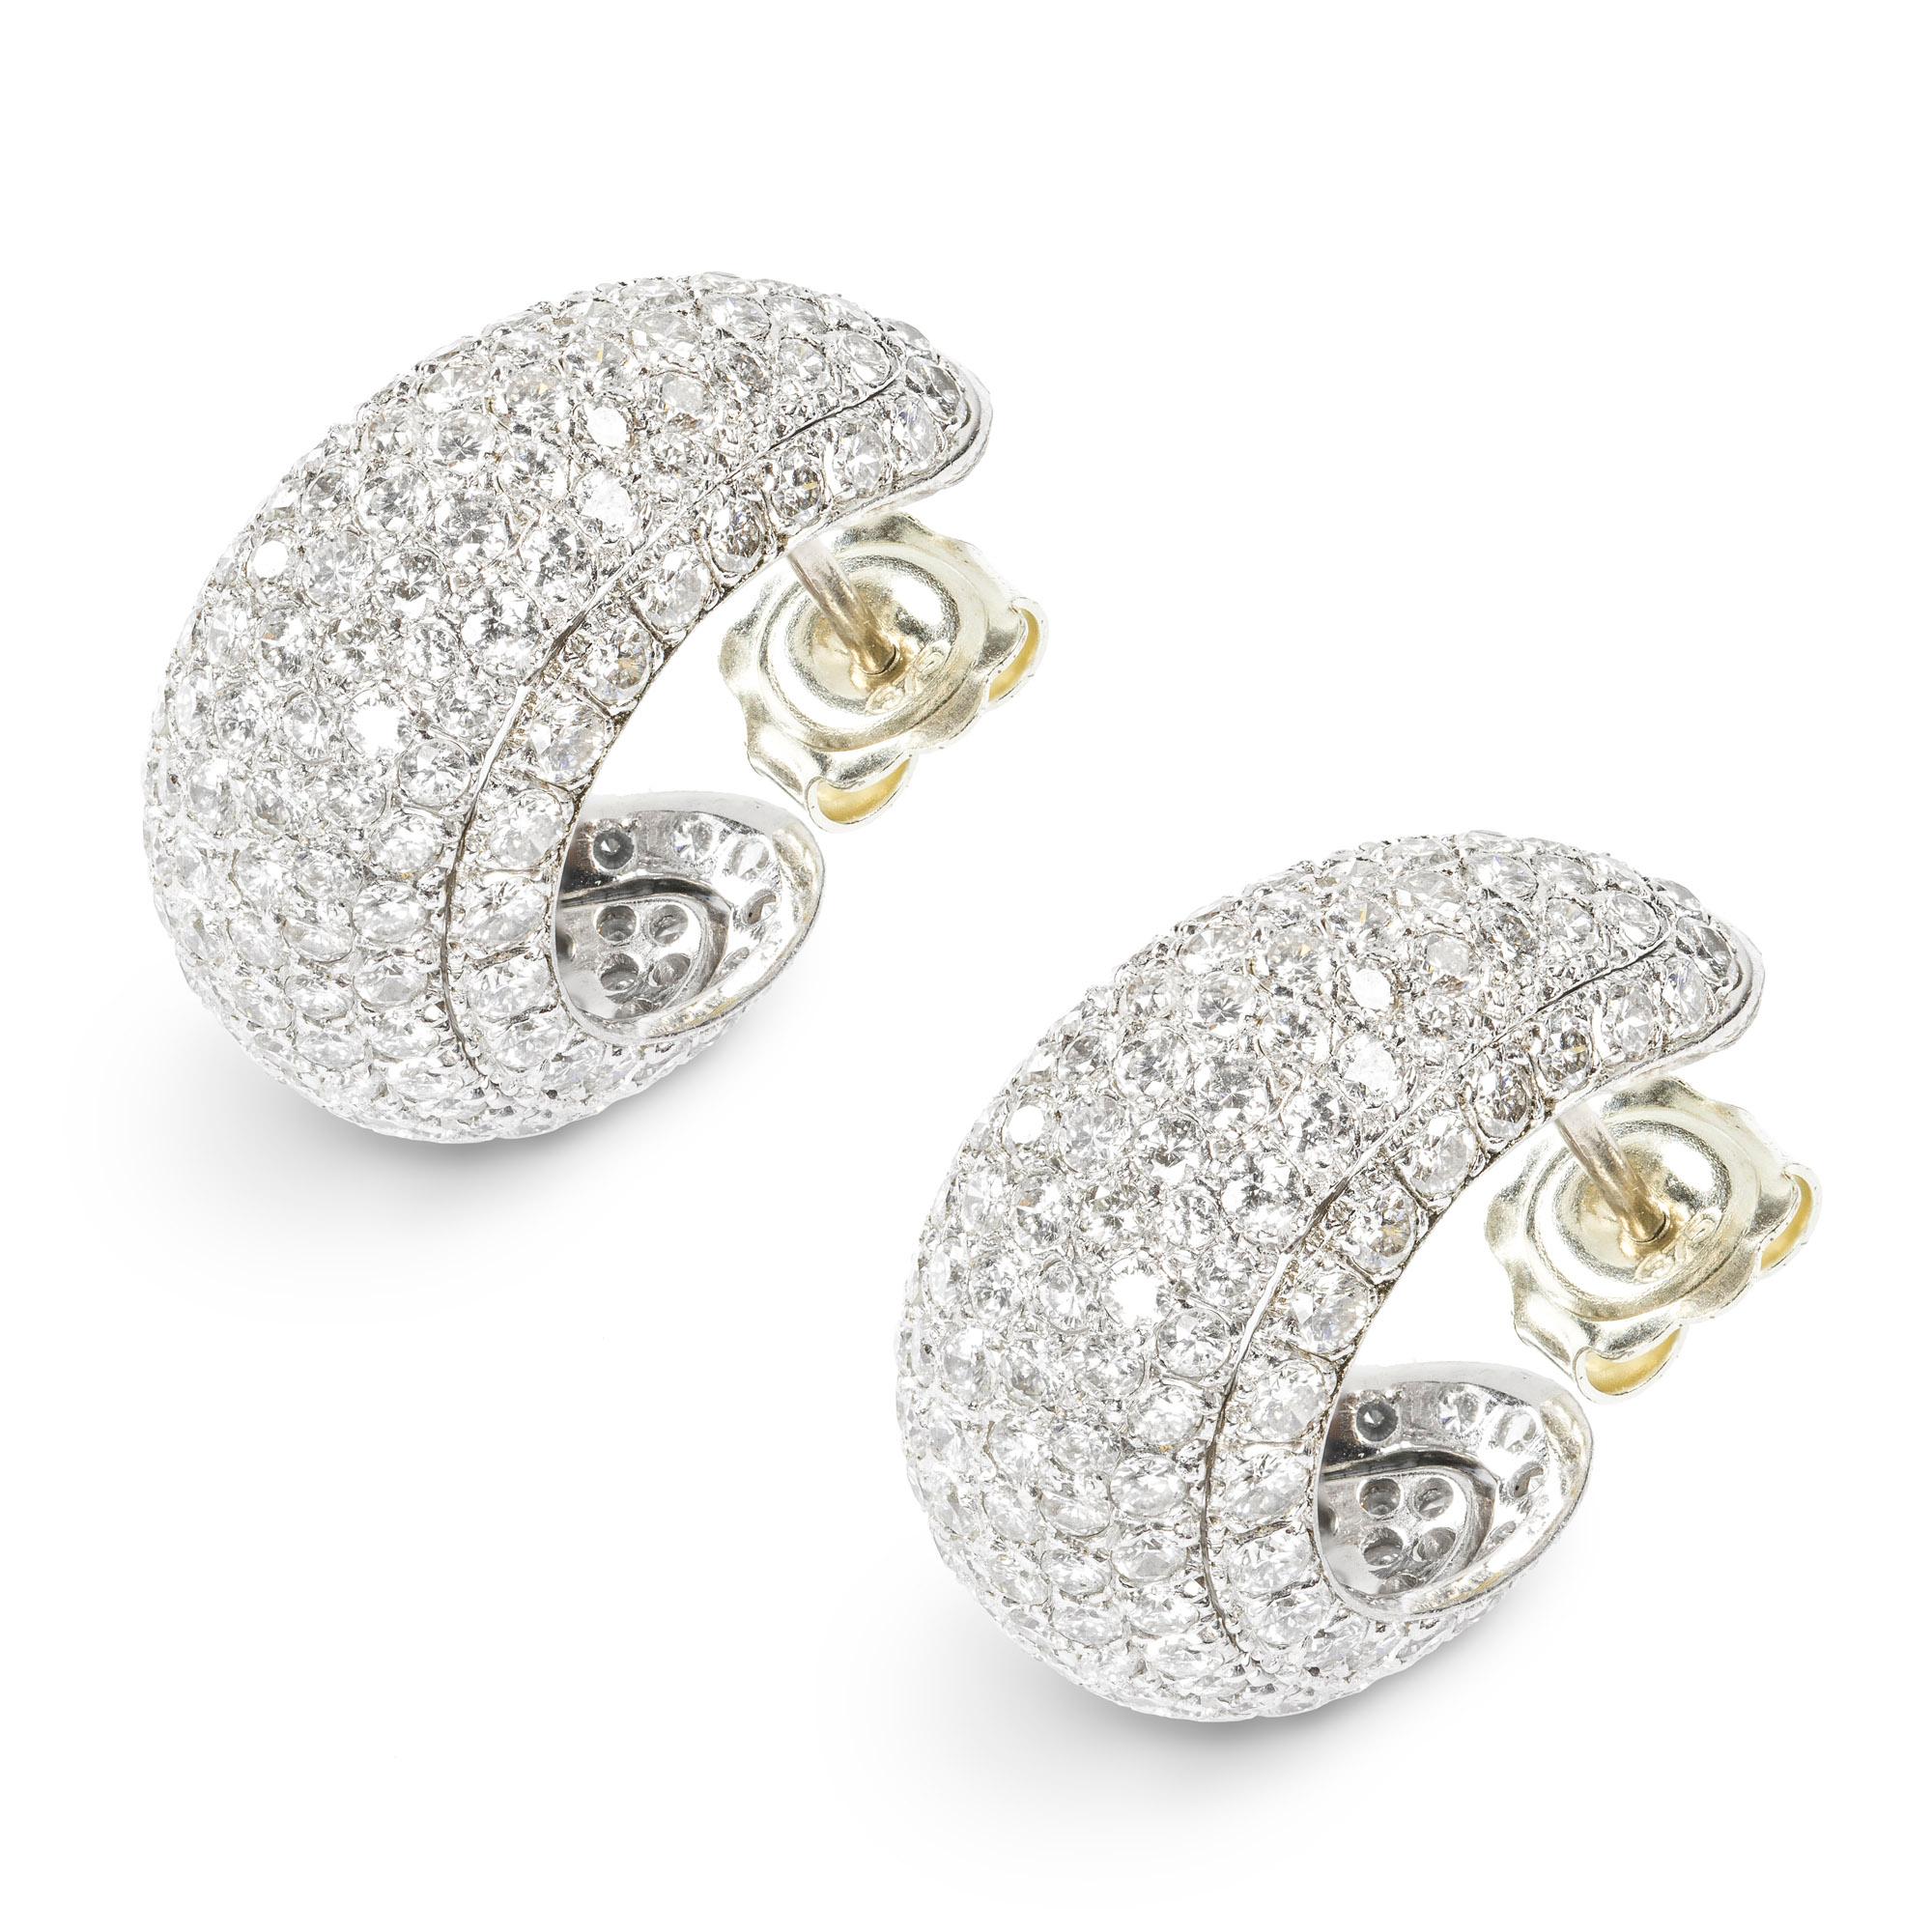 A pair of diamond set half hoop earrings, the diamond bombé style half hoop earrings, estimated to weigh a total of 9 carats, all pavé set to a white gold mount with post and C-scroll fittings, circa 2000, later hallmarked 9ct gold London 2014,